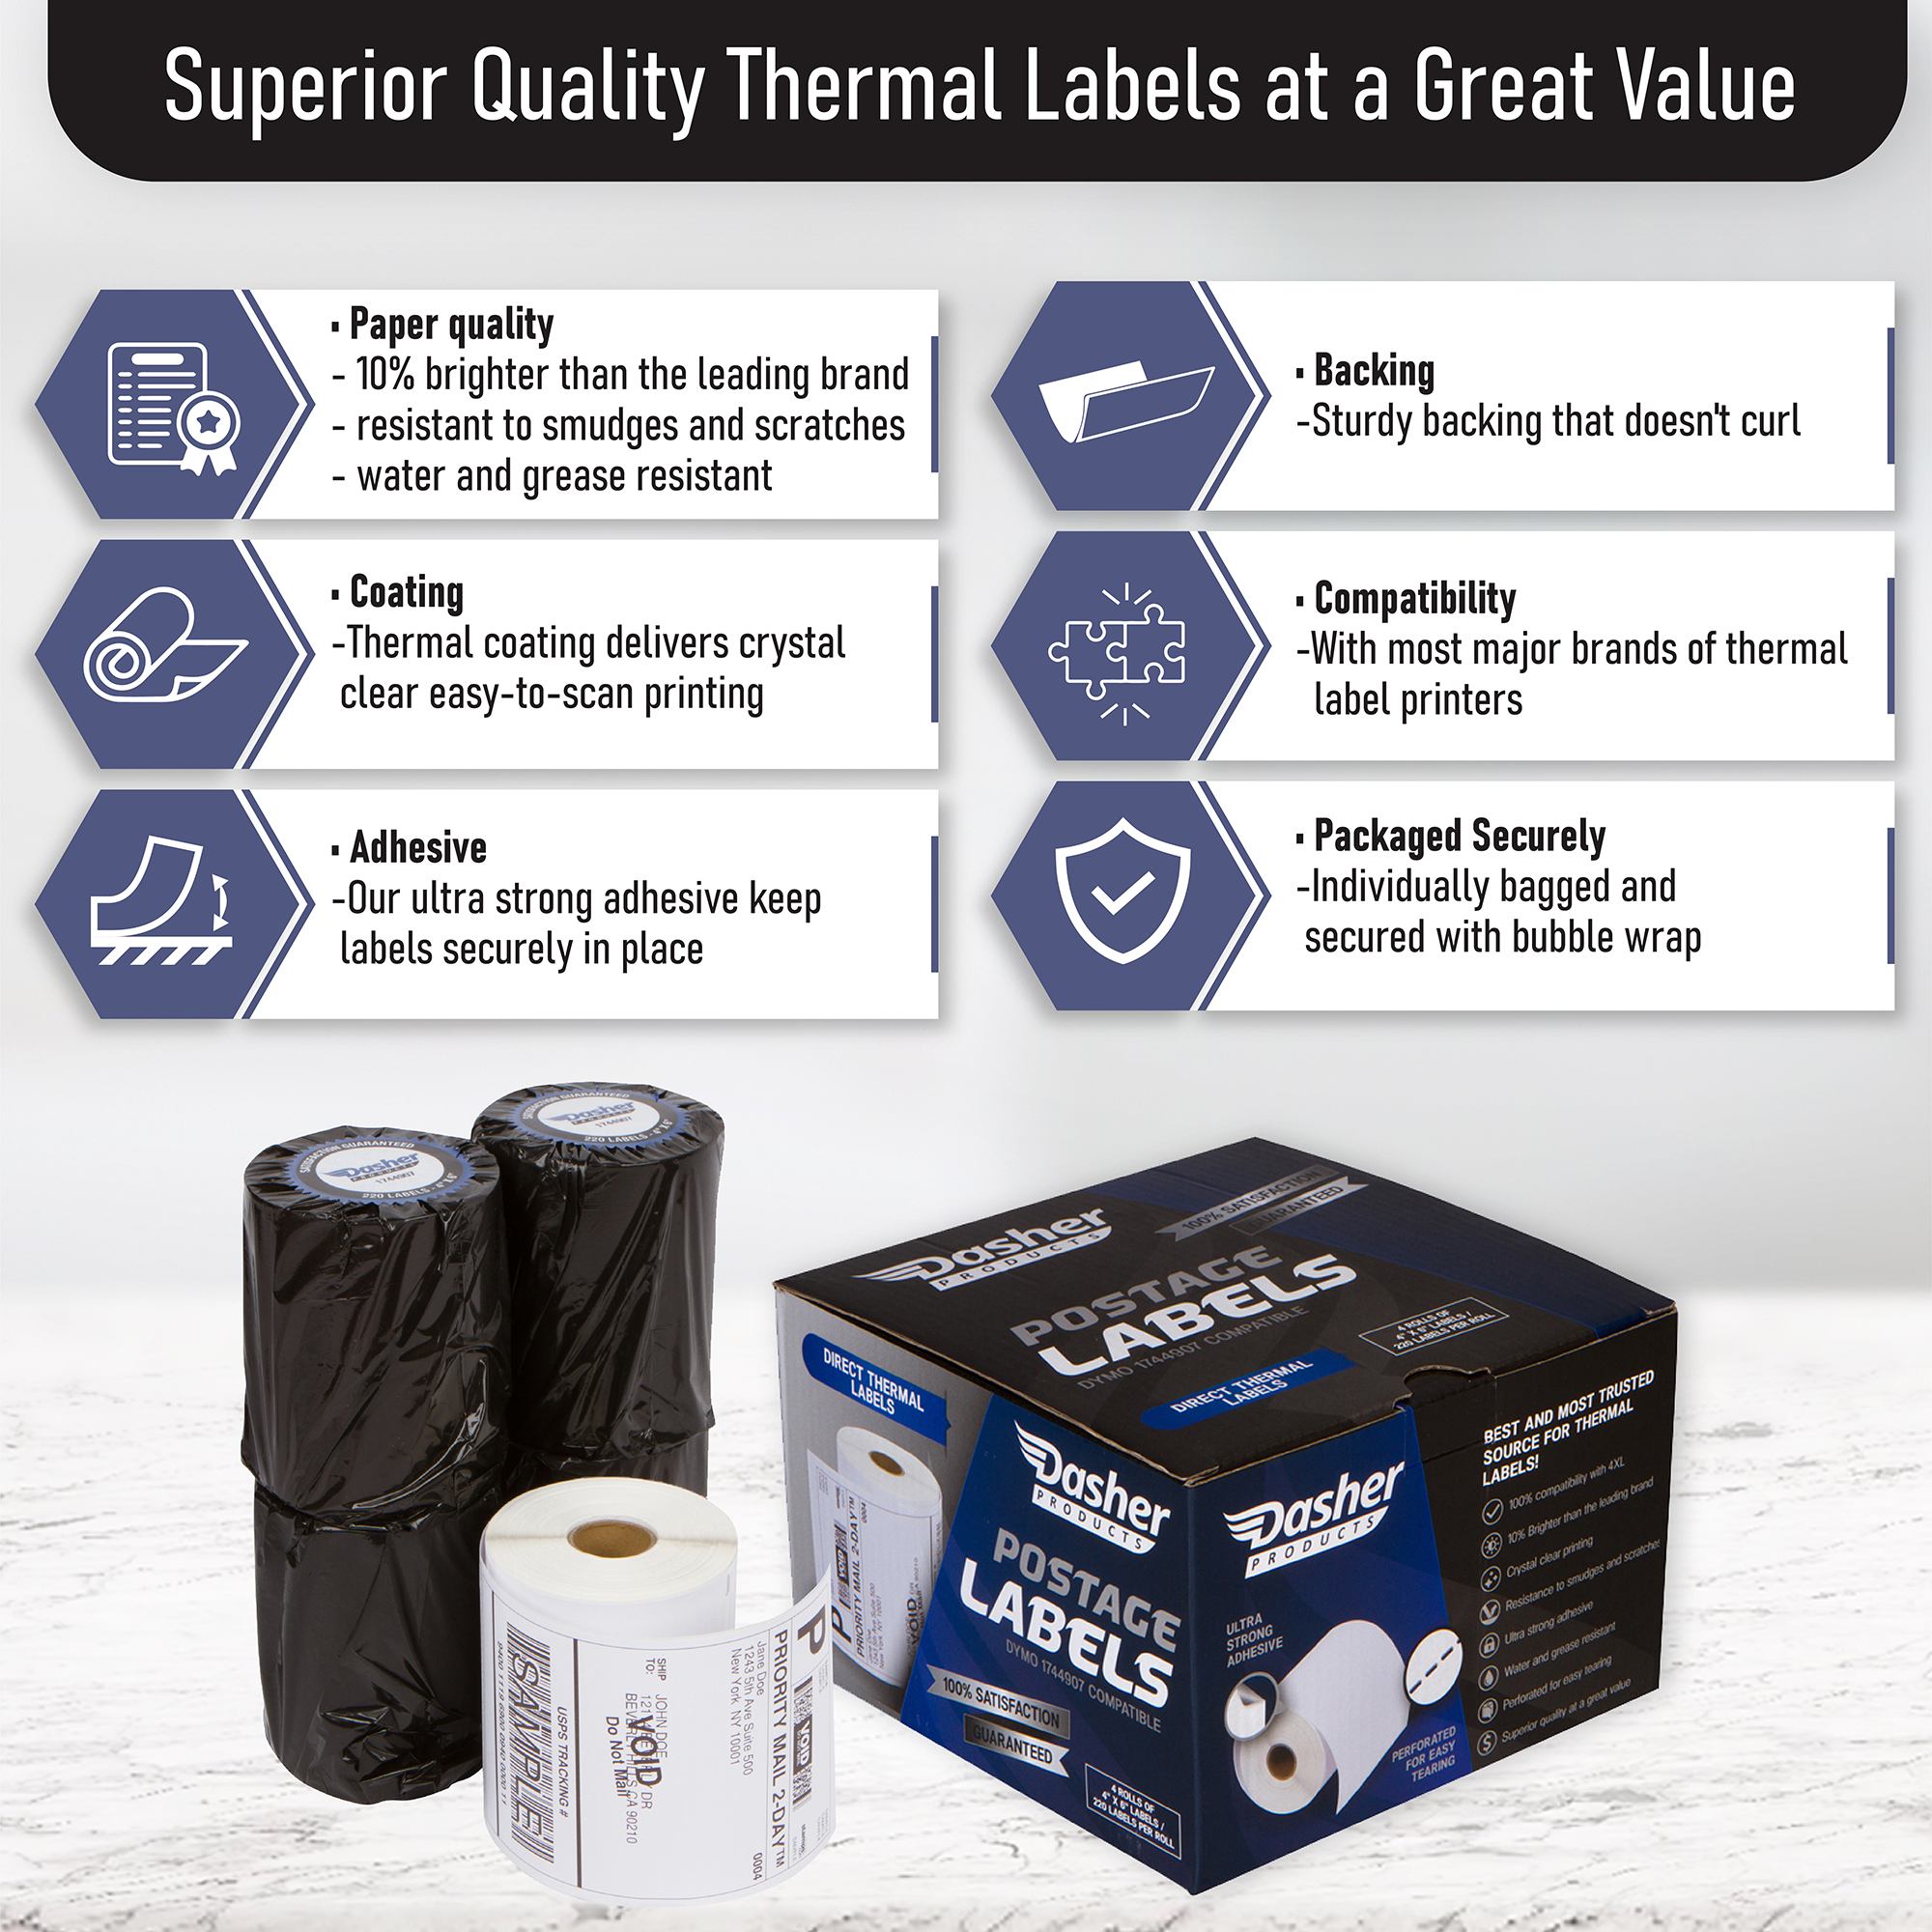 Manufacturing Dymo Compatible Thermal Printer Labels